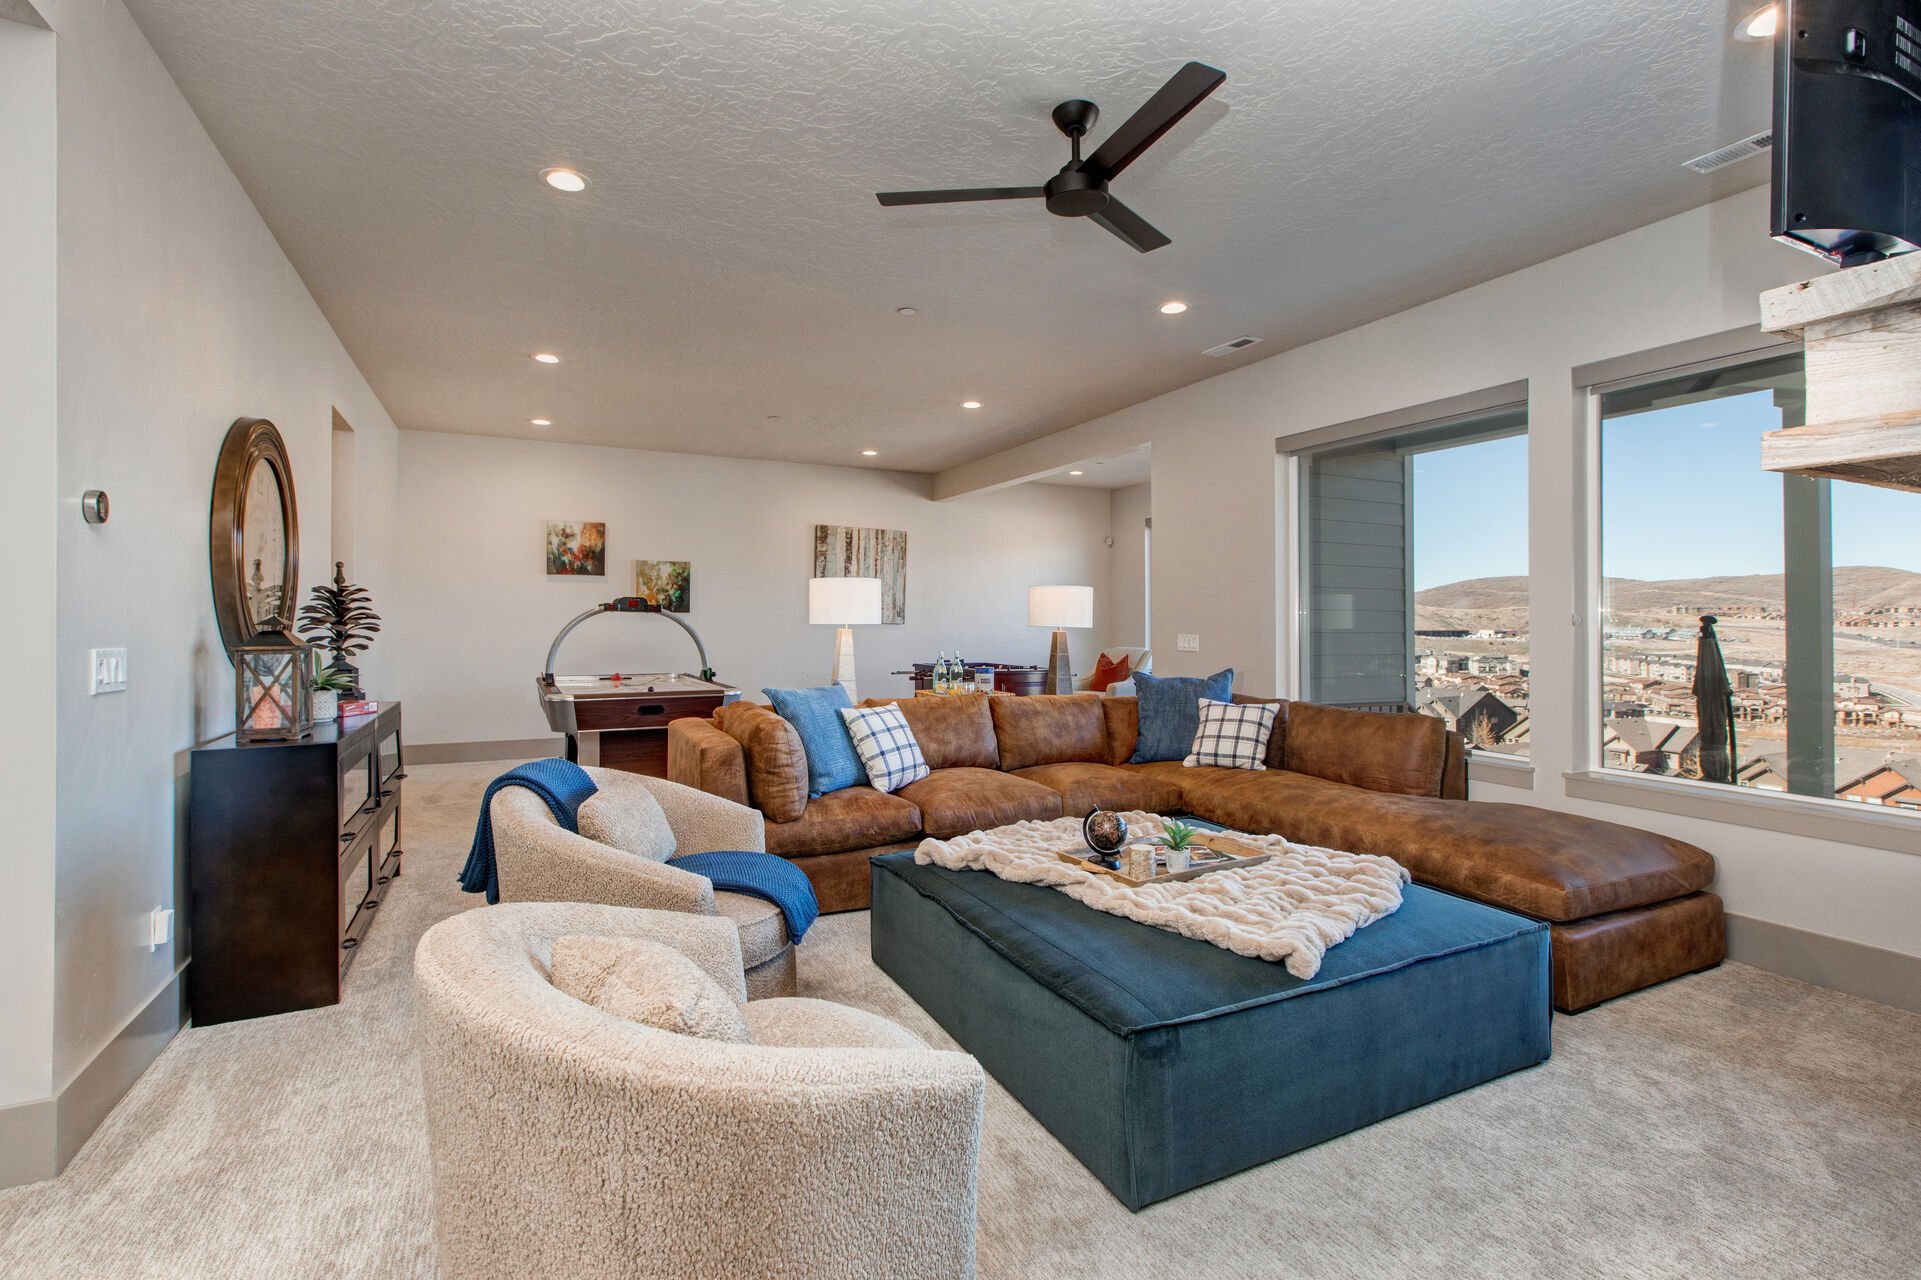 Lower Level Living and Game Room with over-sized leather sectional, plush arm chairs & ottoman, gas fireplace, Samsung smart tv, half bathroom, foosball table, air hockey table, and private patio hot tub access